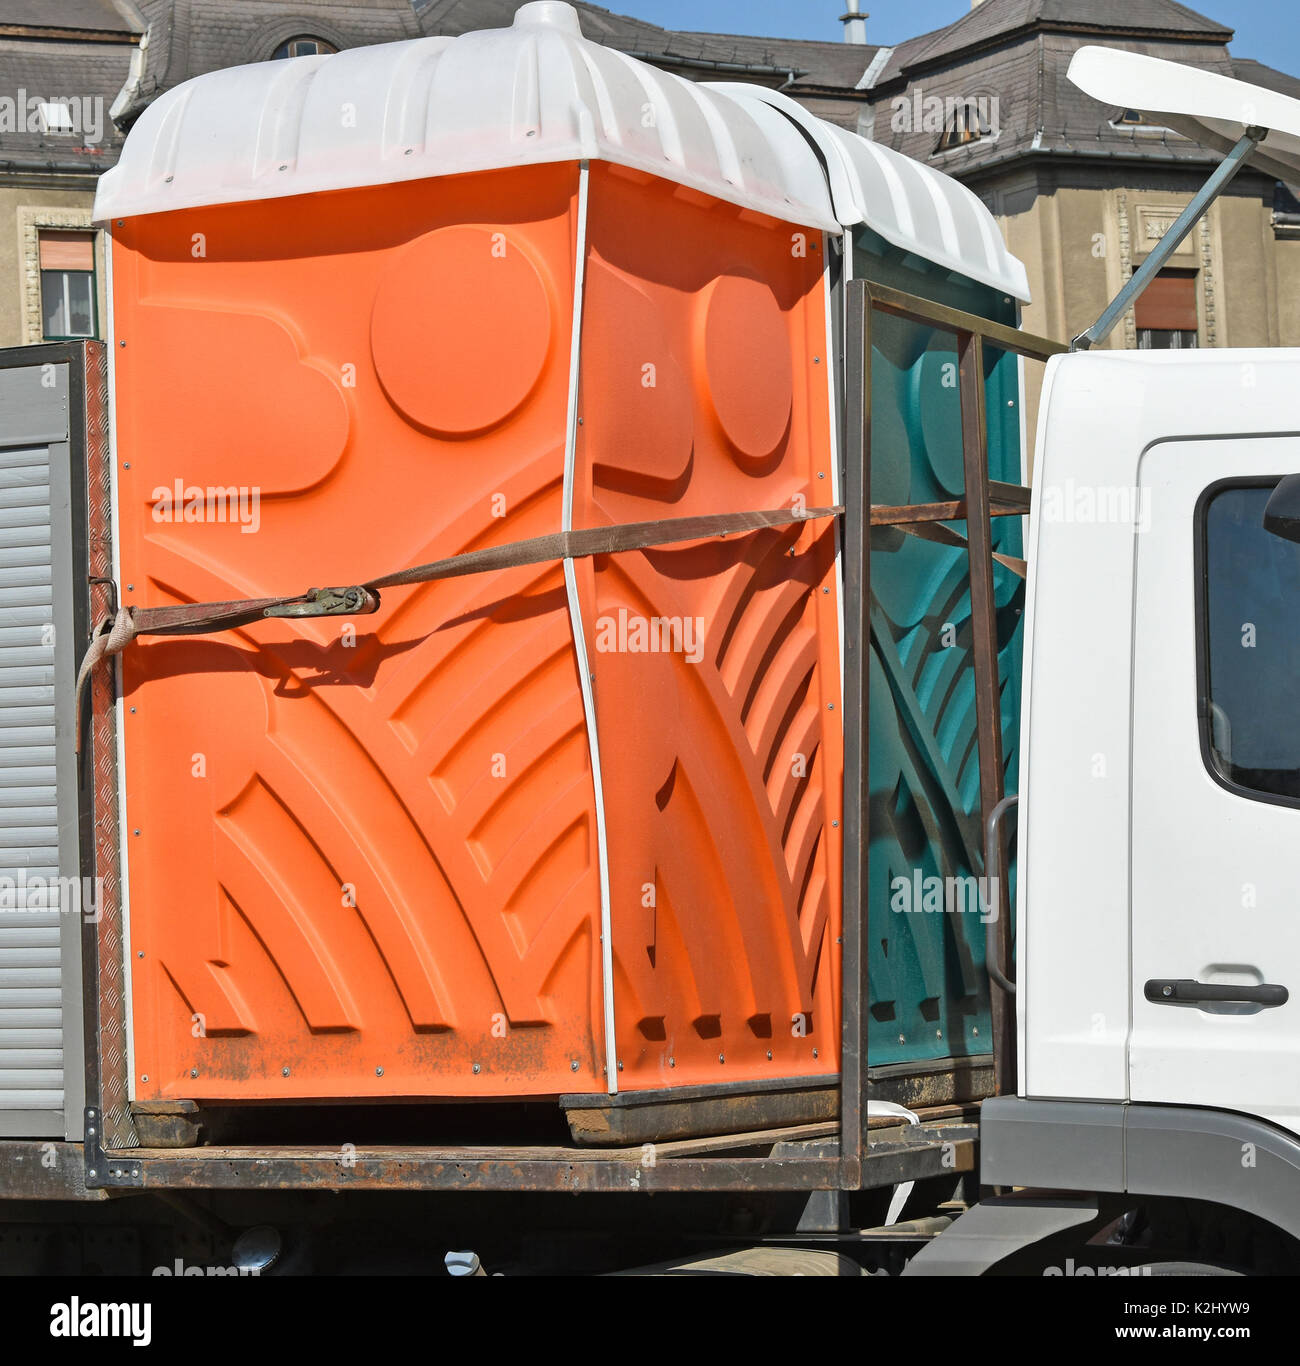 Portable toilets on a vehicle Stock Photo